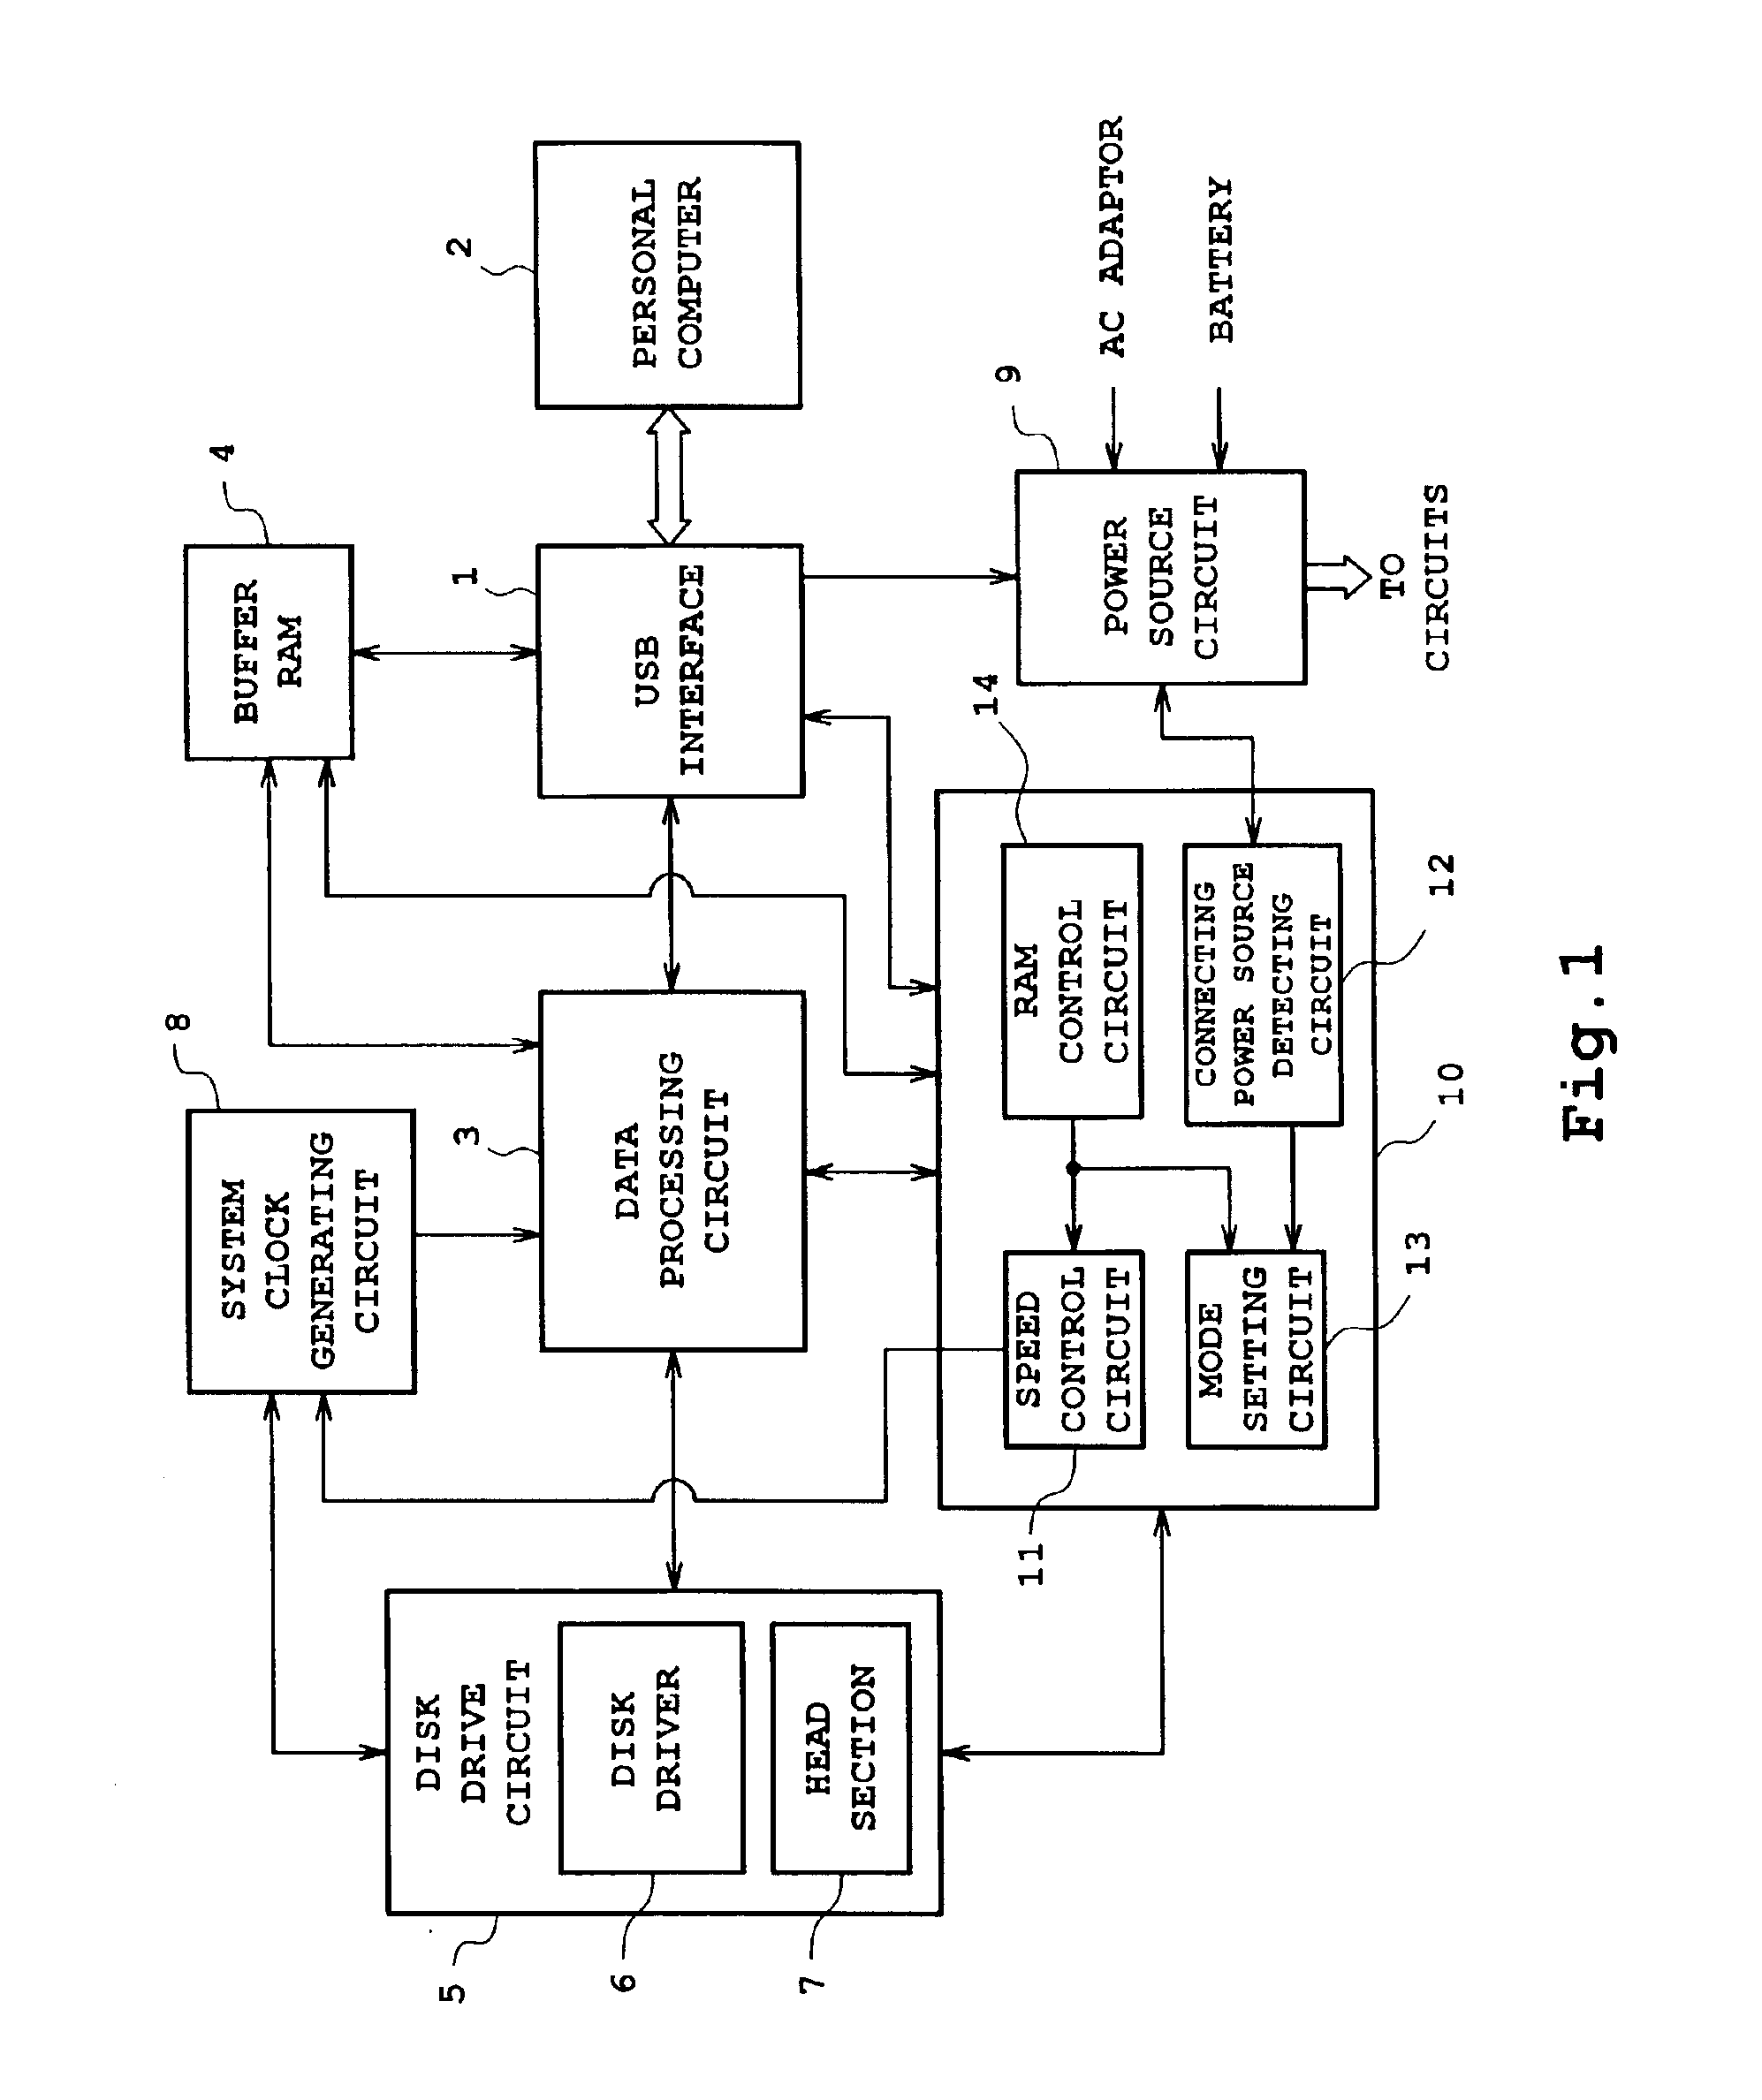 Controlling the maximum rotation speed of a disk drive device based on the presence of an external power source and the possibility of a buffer underrun